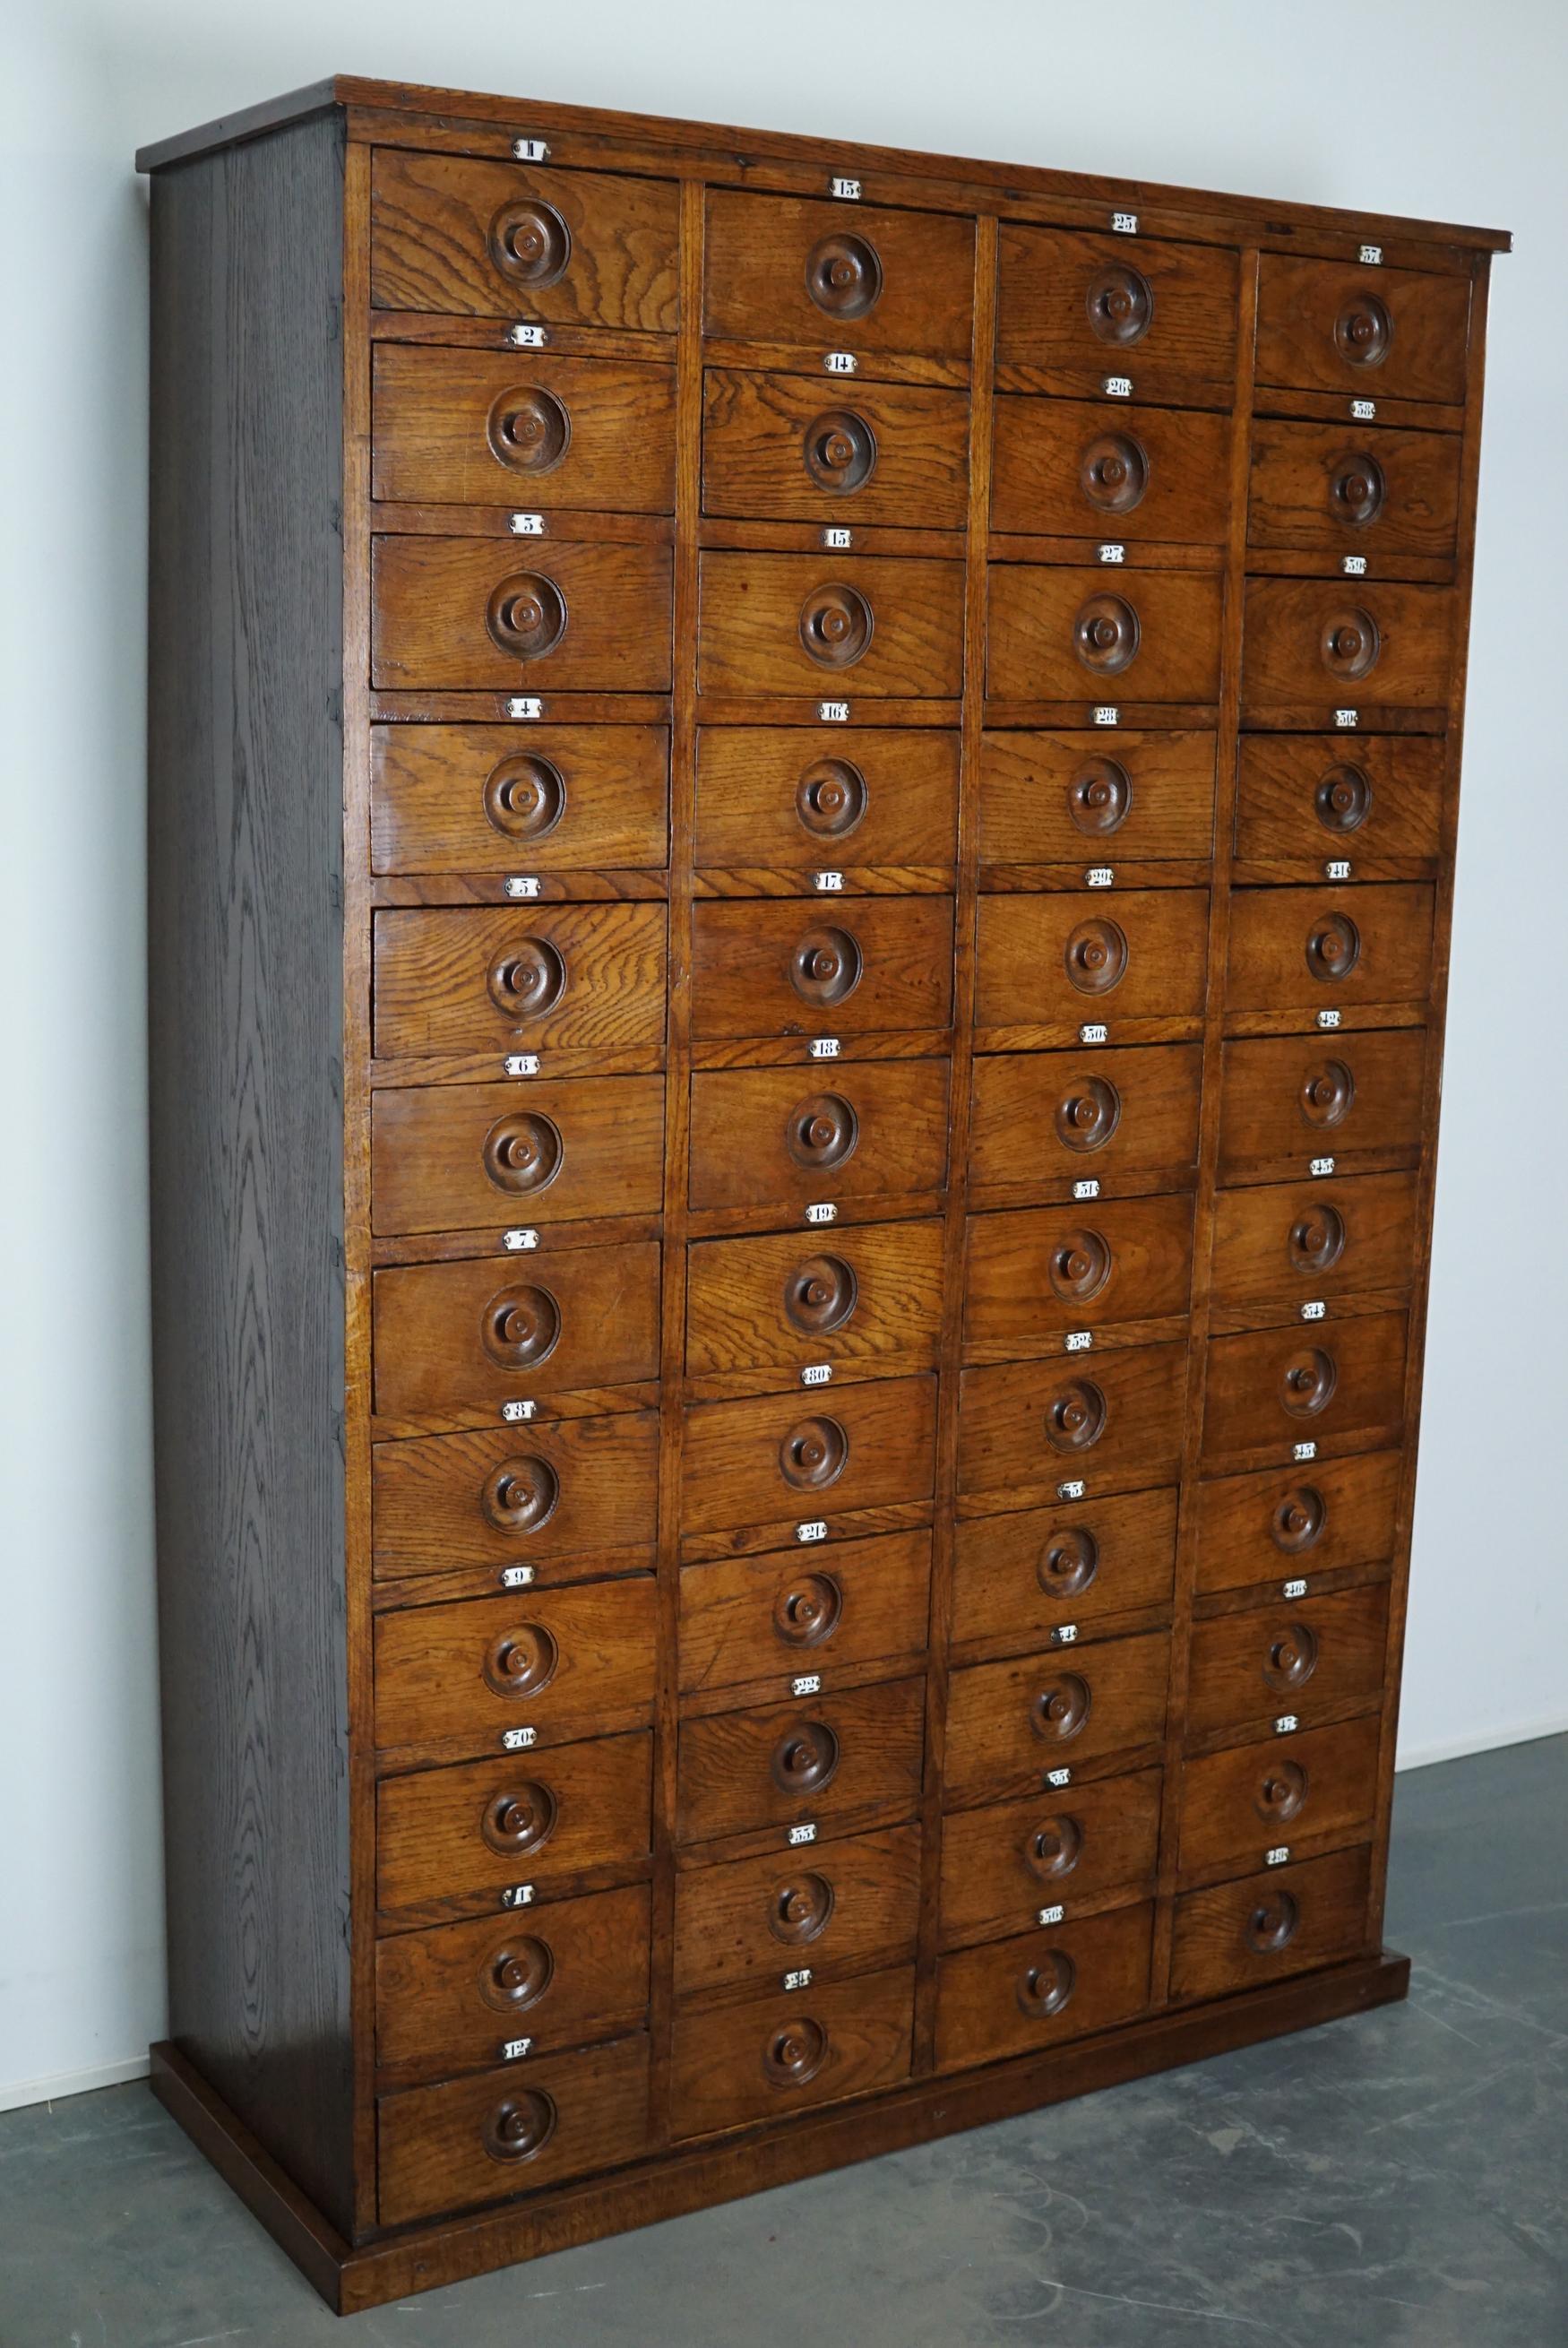 This apothecary cabinet was made circa 1920s in England. It features 48 drawers with amazing wooden knobs and enamel numbers. The interior dimensions of the drawers are: D x W x H 40 x 25 x 11 cm.